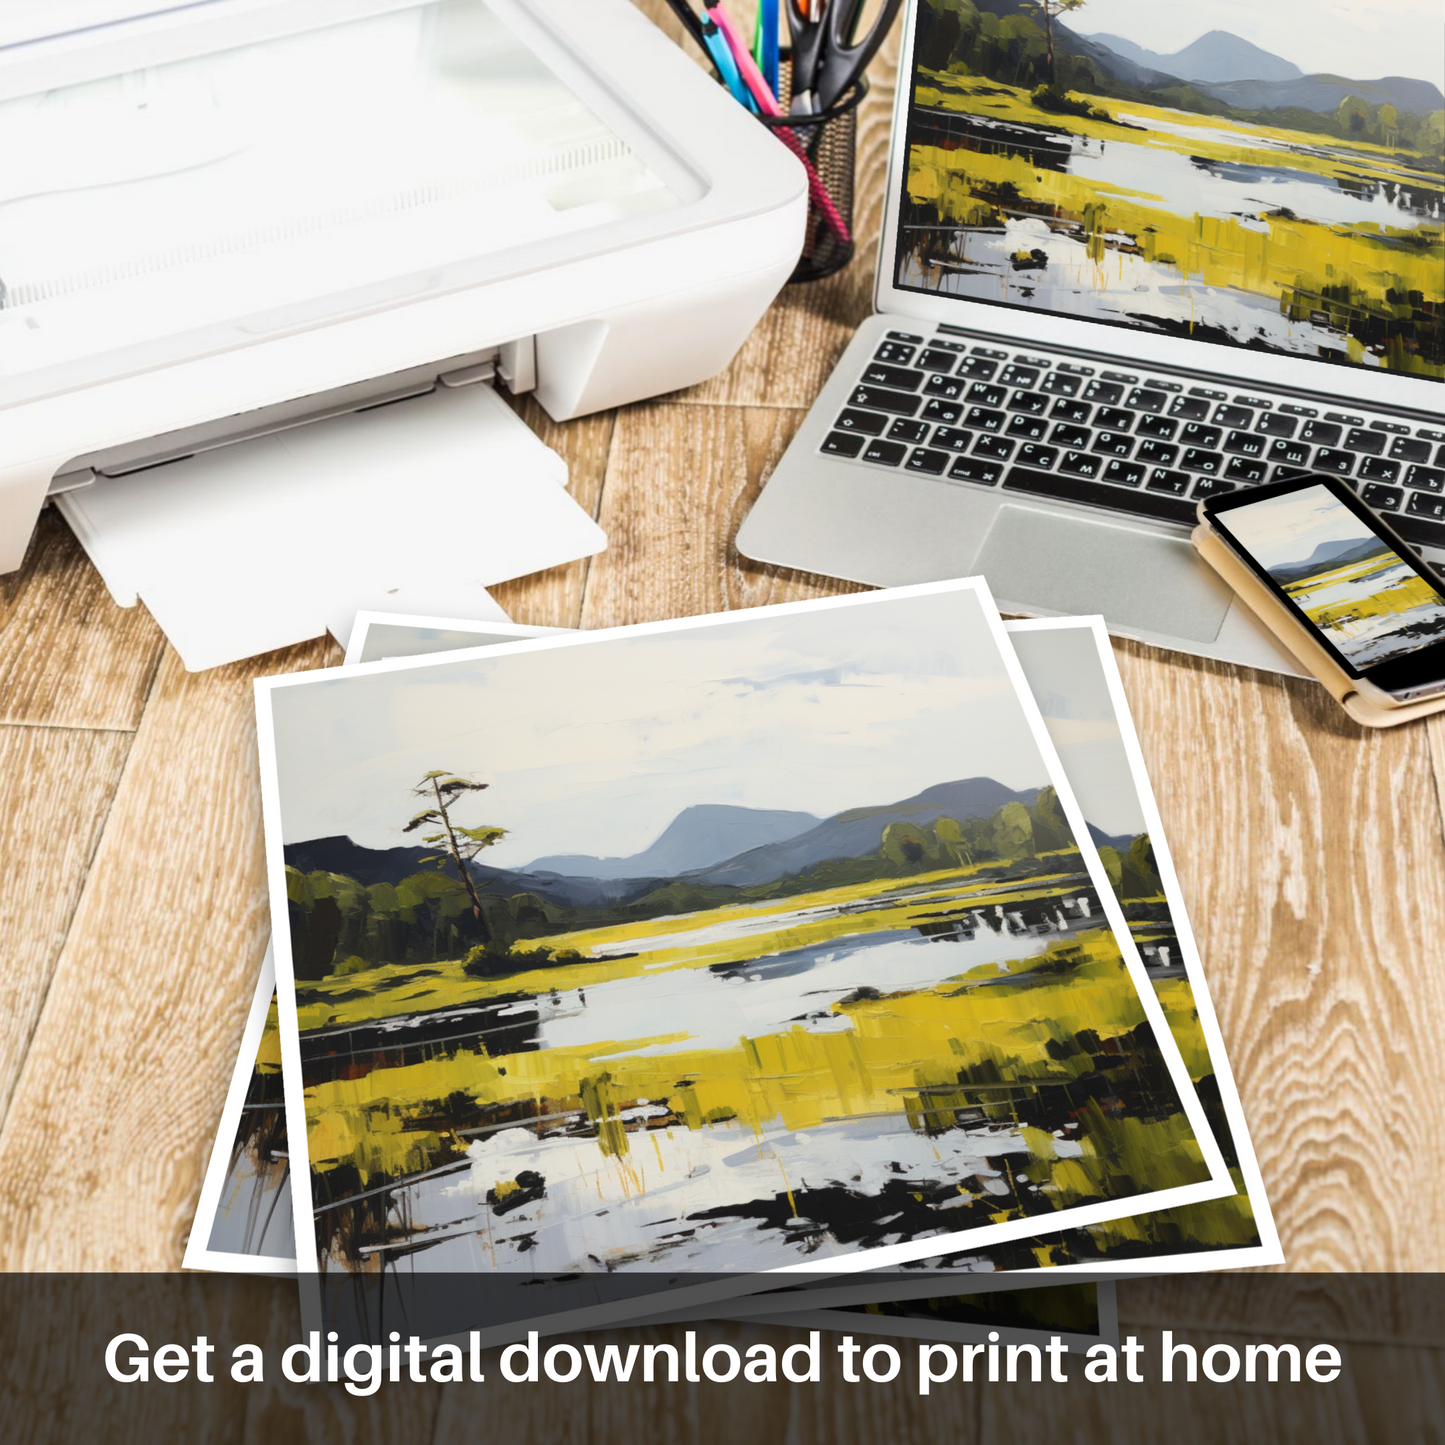 Downloadable and printable picture of Loch Ard, Stirling in summer